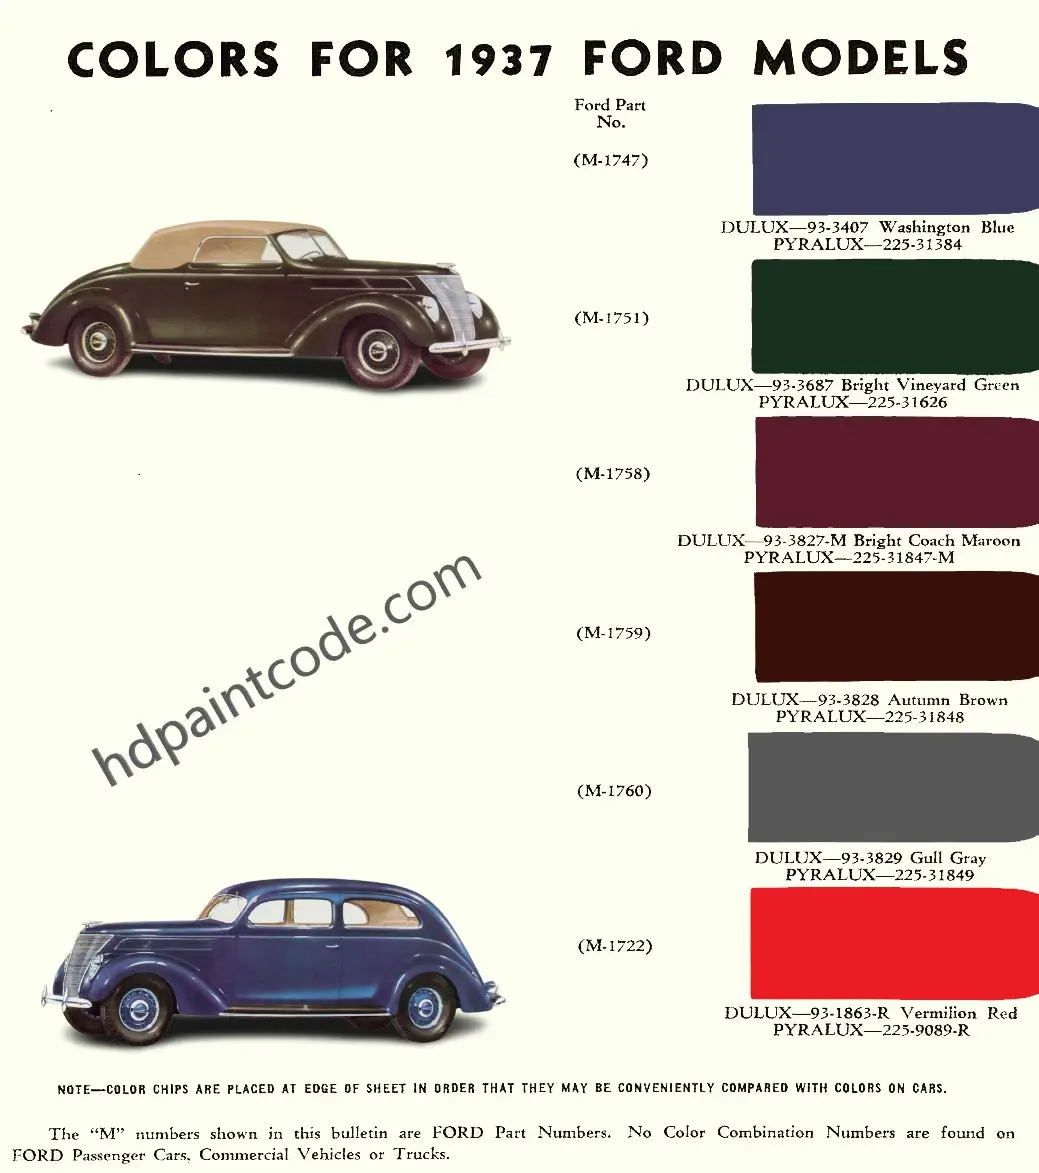 Paint Codes, paint swatches, and mixing formulas for 1937 ford vehicles